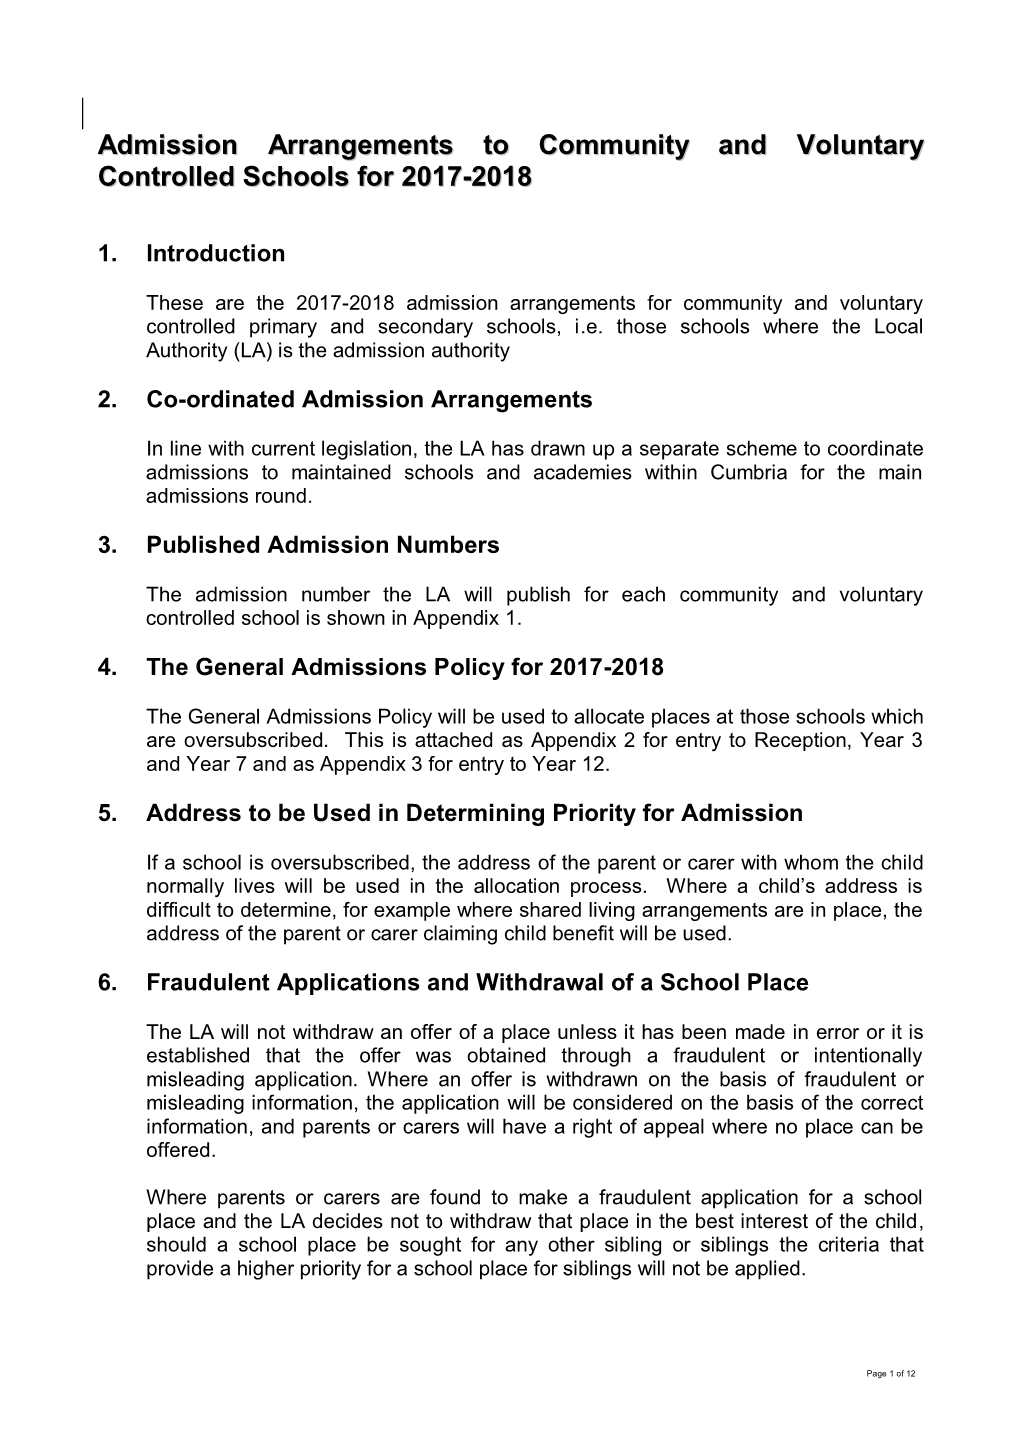 Admissions Policy for 2017-2018